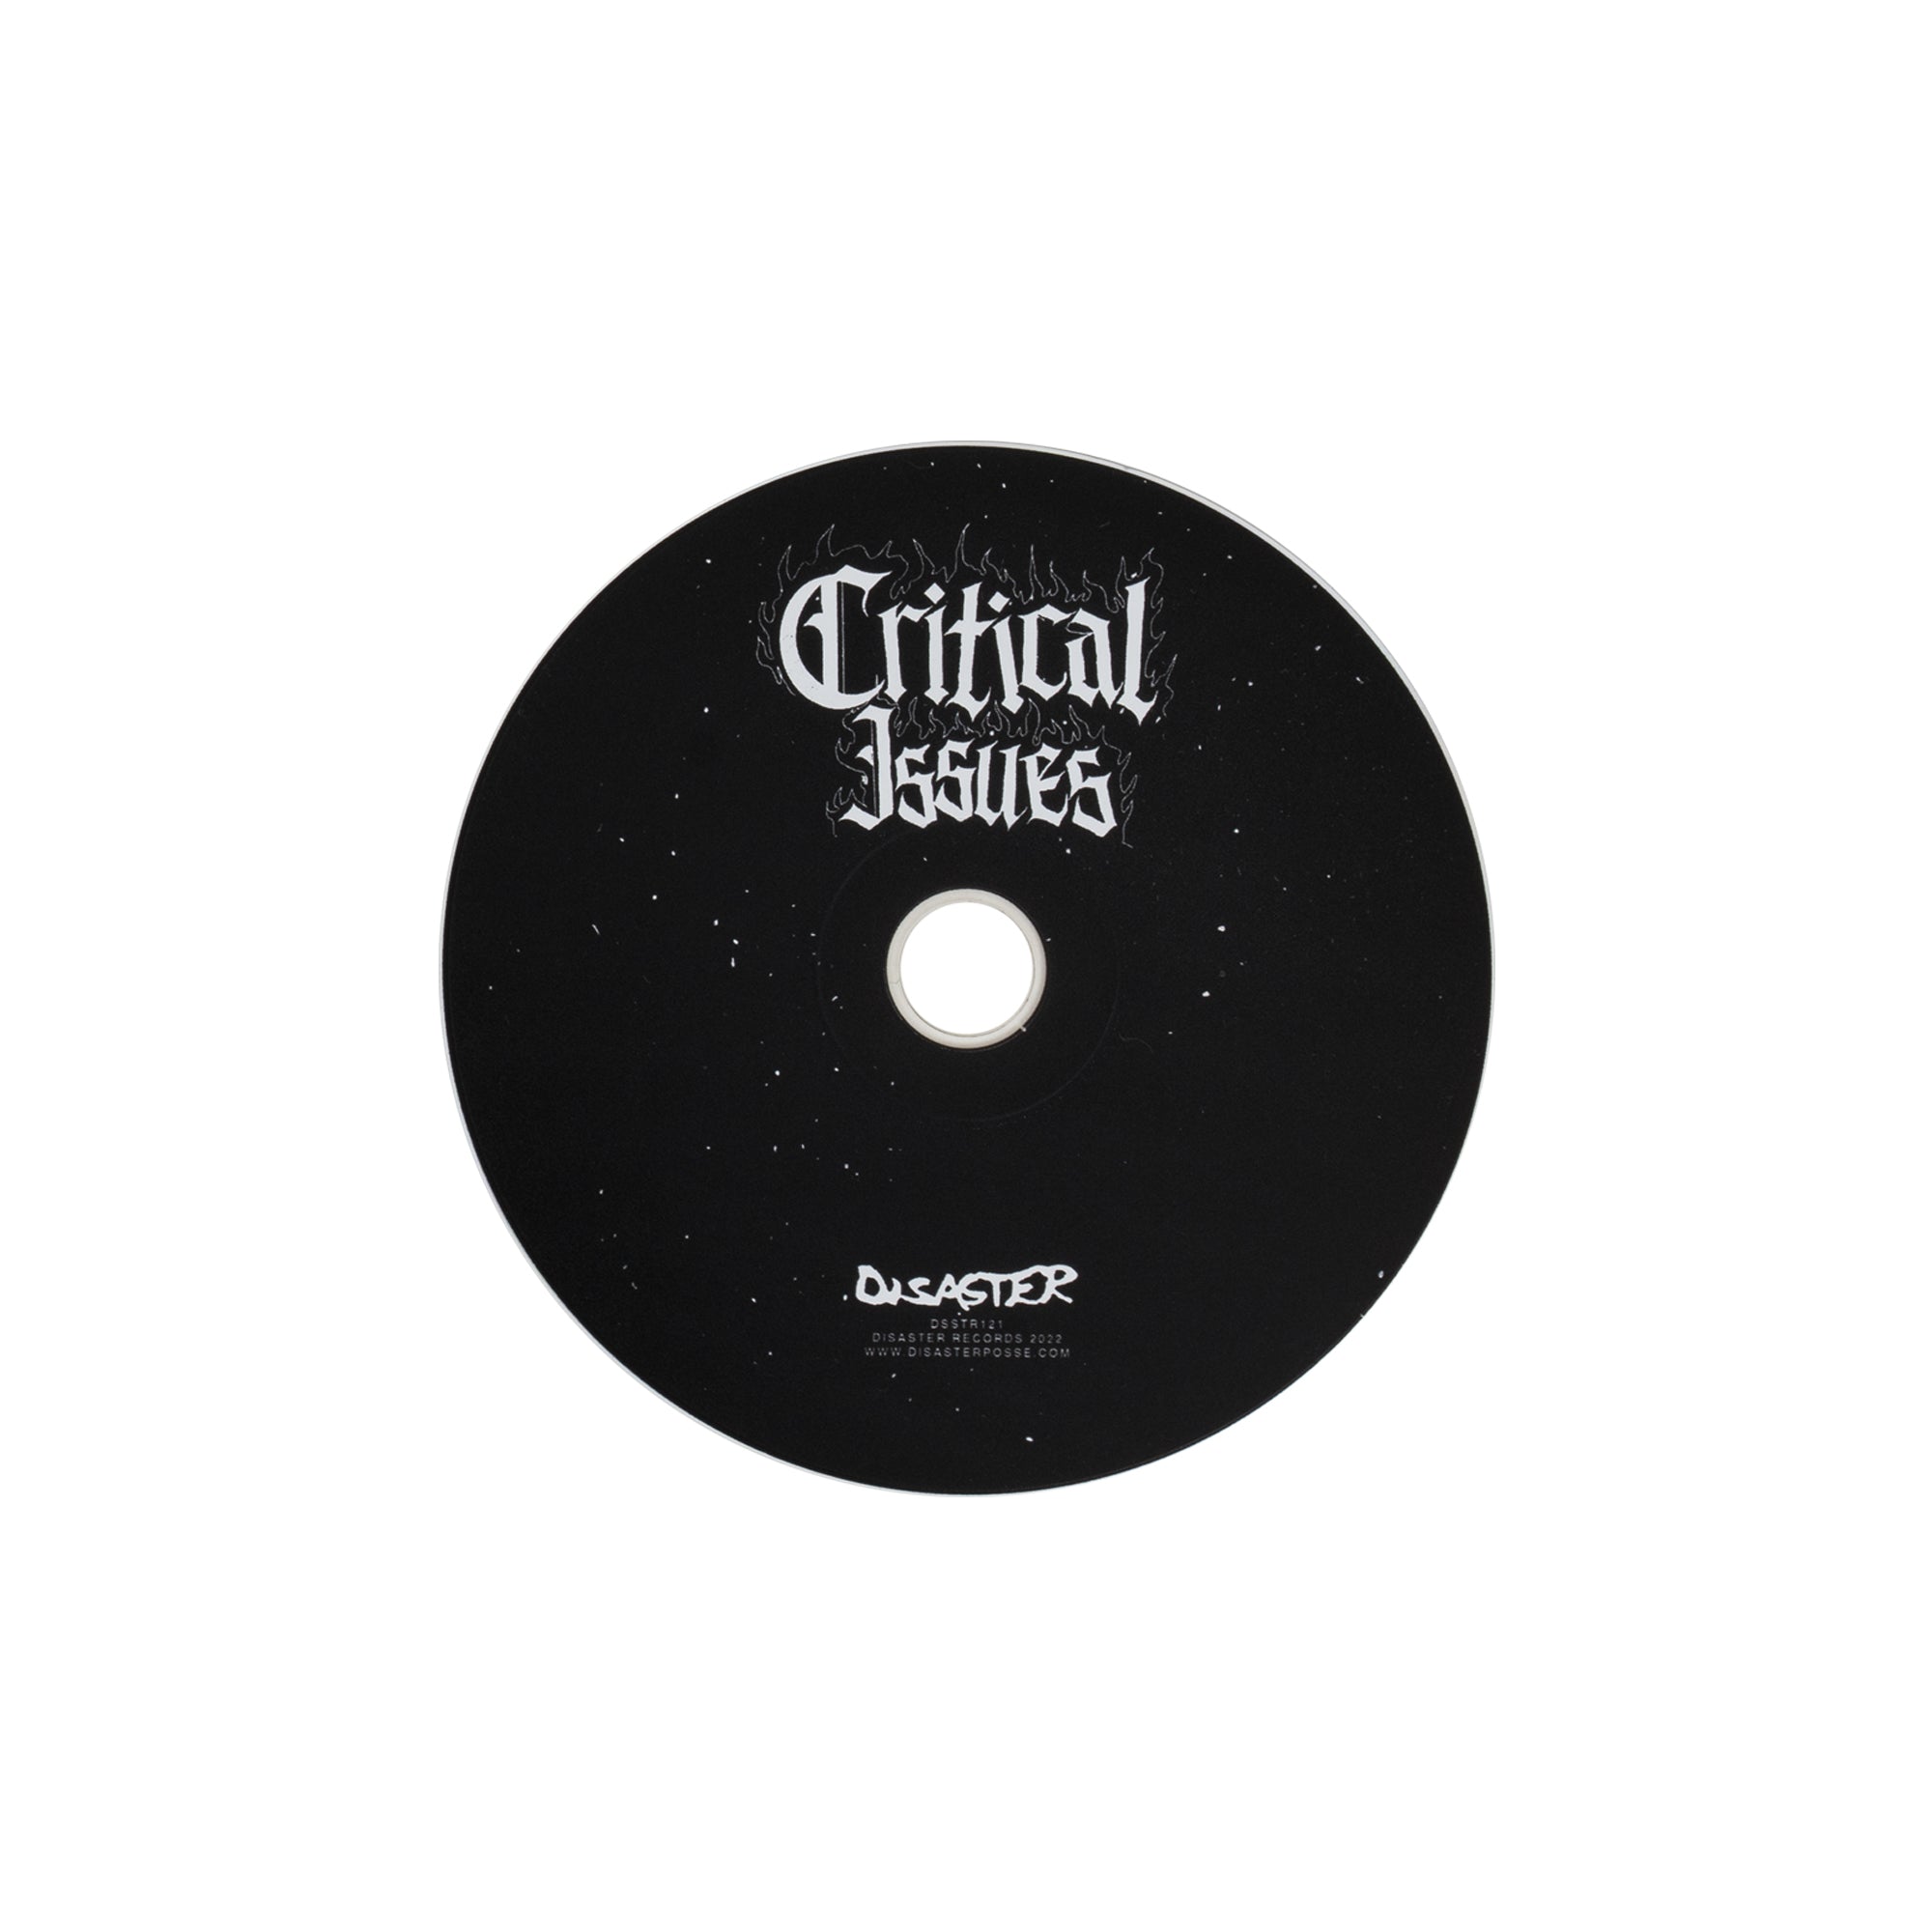 CRITICAL ISSUES - S/T CDs